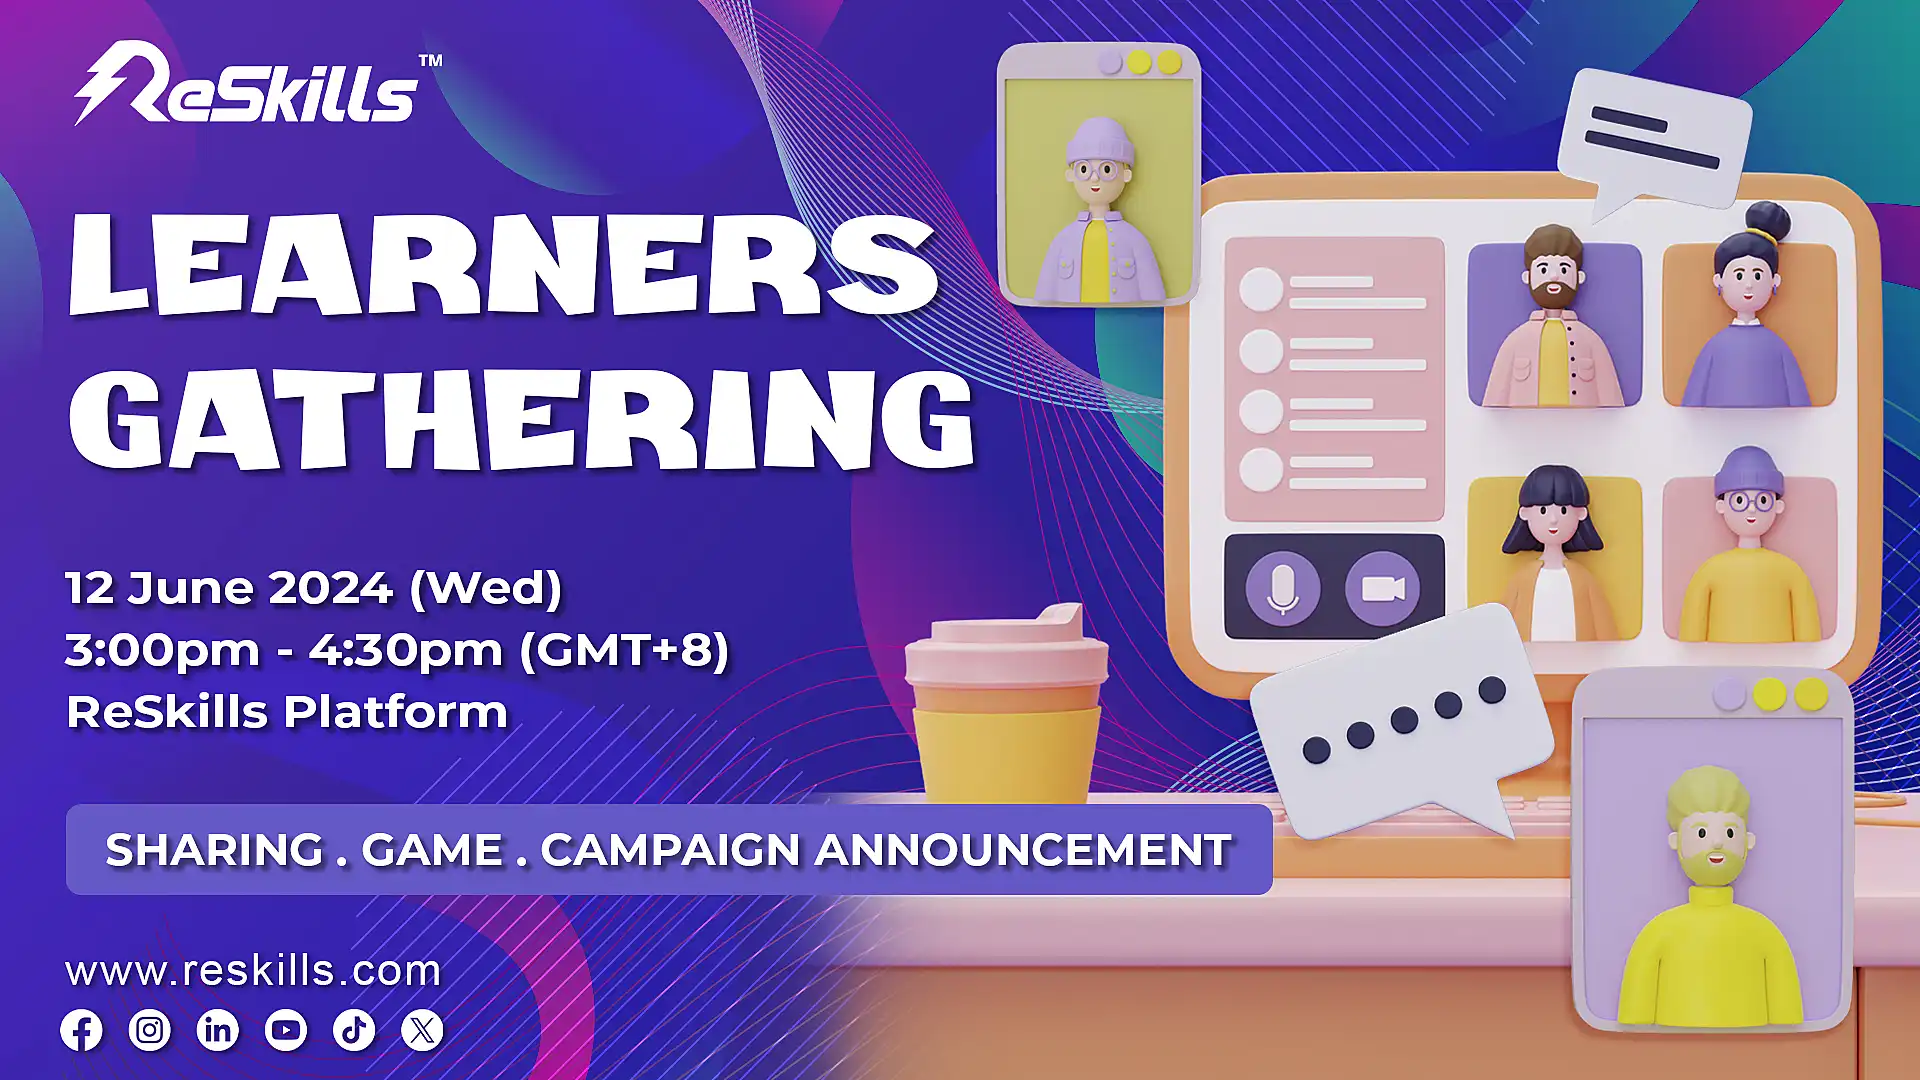 ReSkills Learners Gathering Sharing, Game & Campaign Announcement